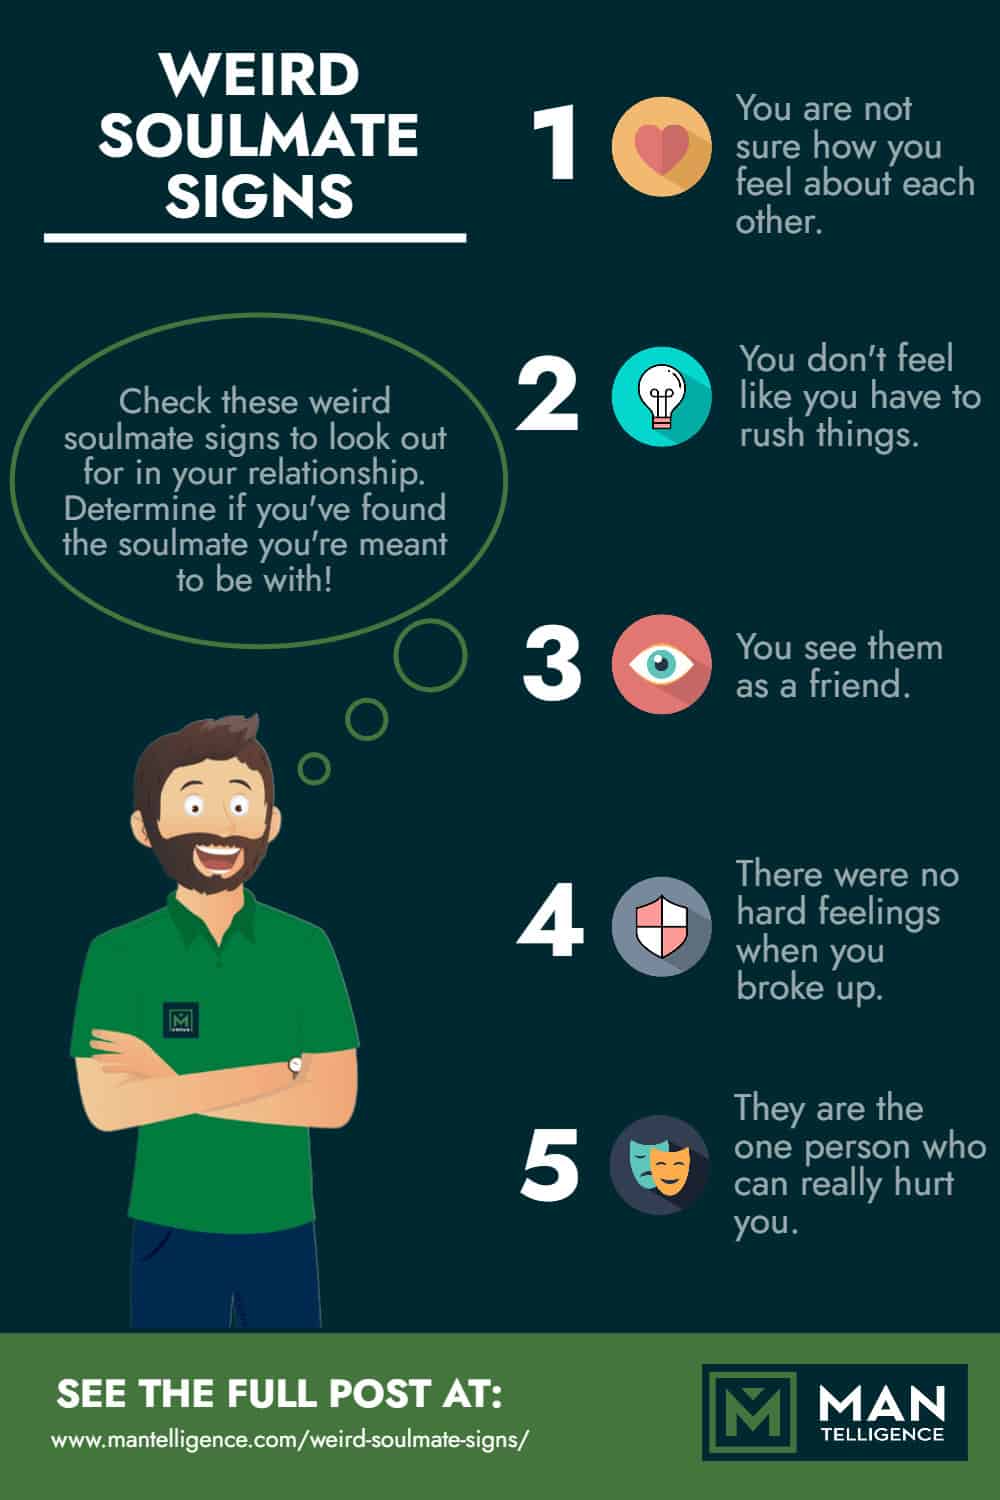 Weird Soulmate Signs - Infographic